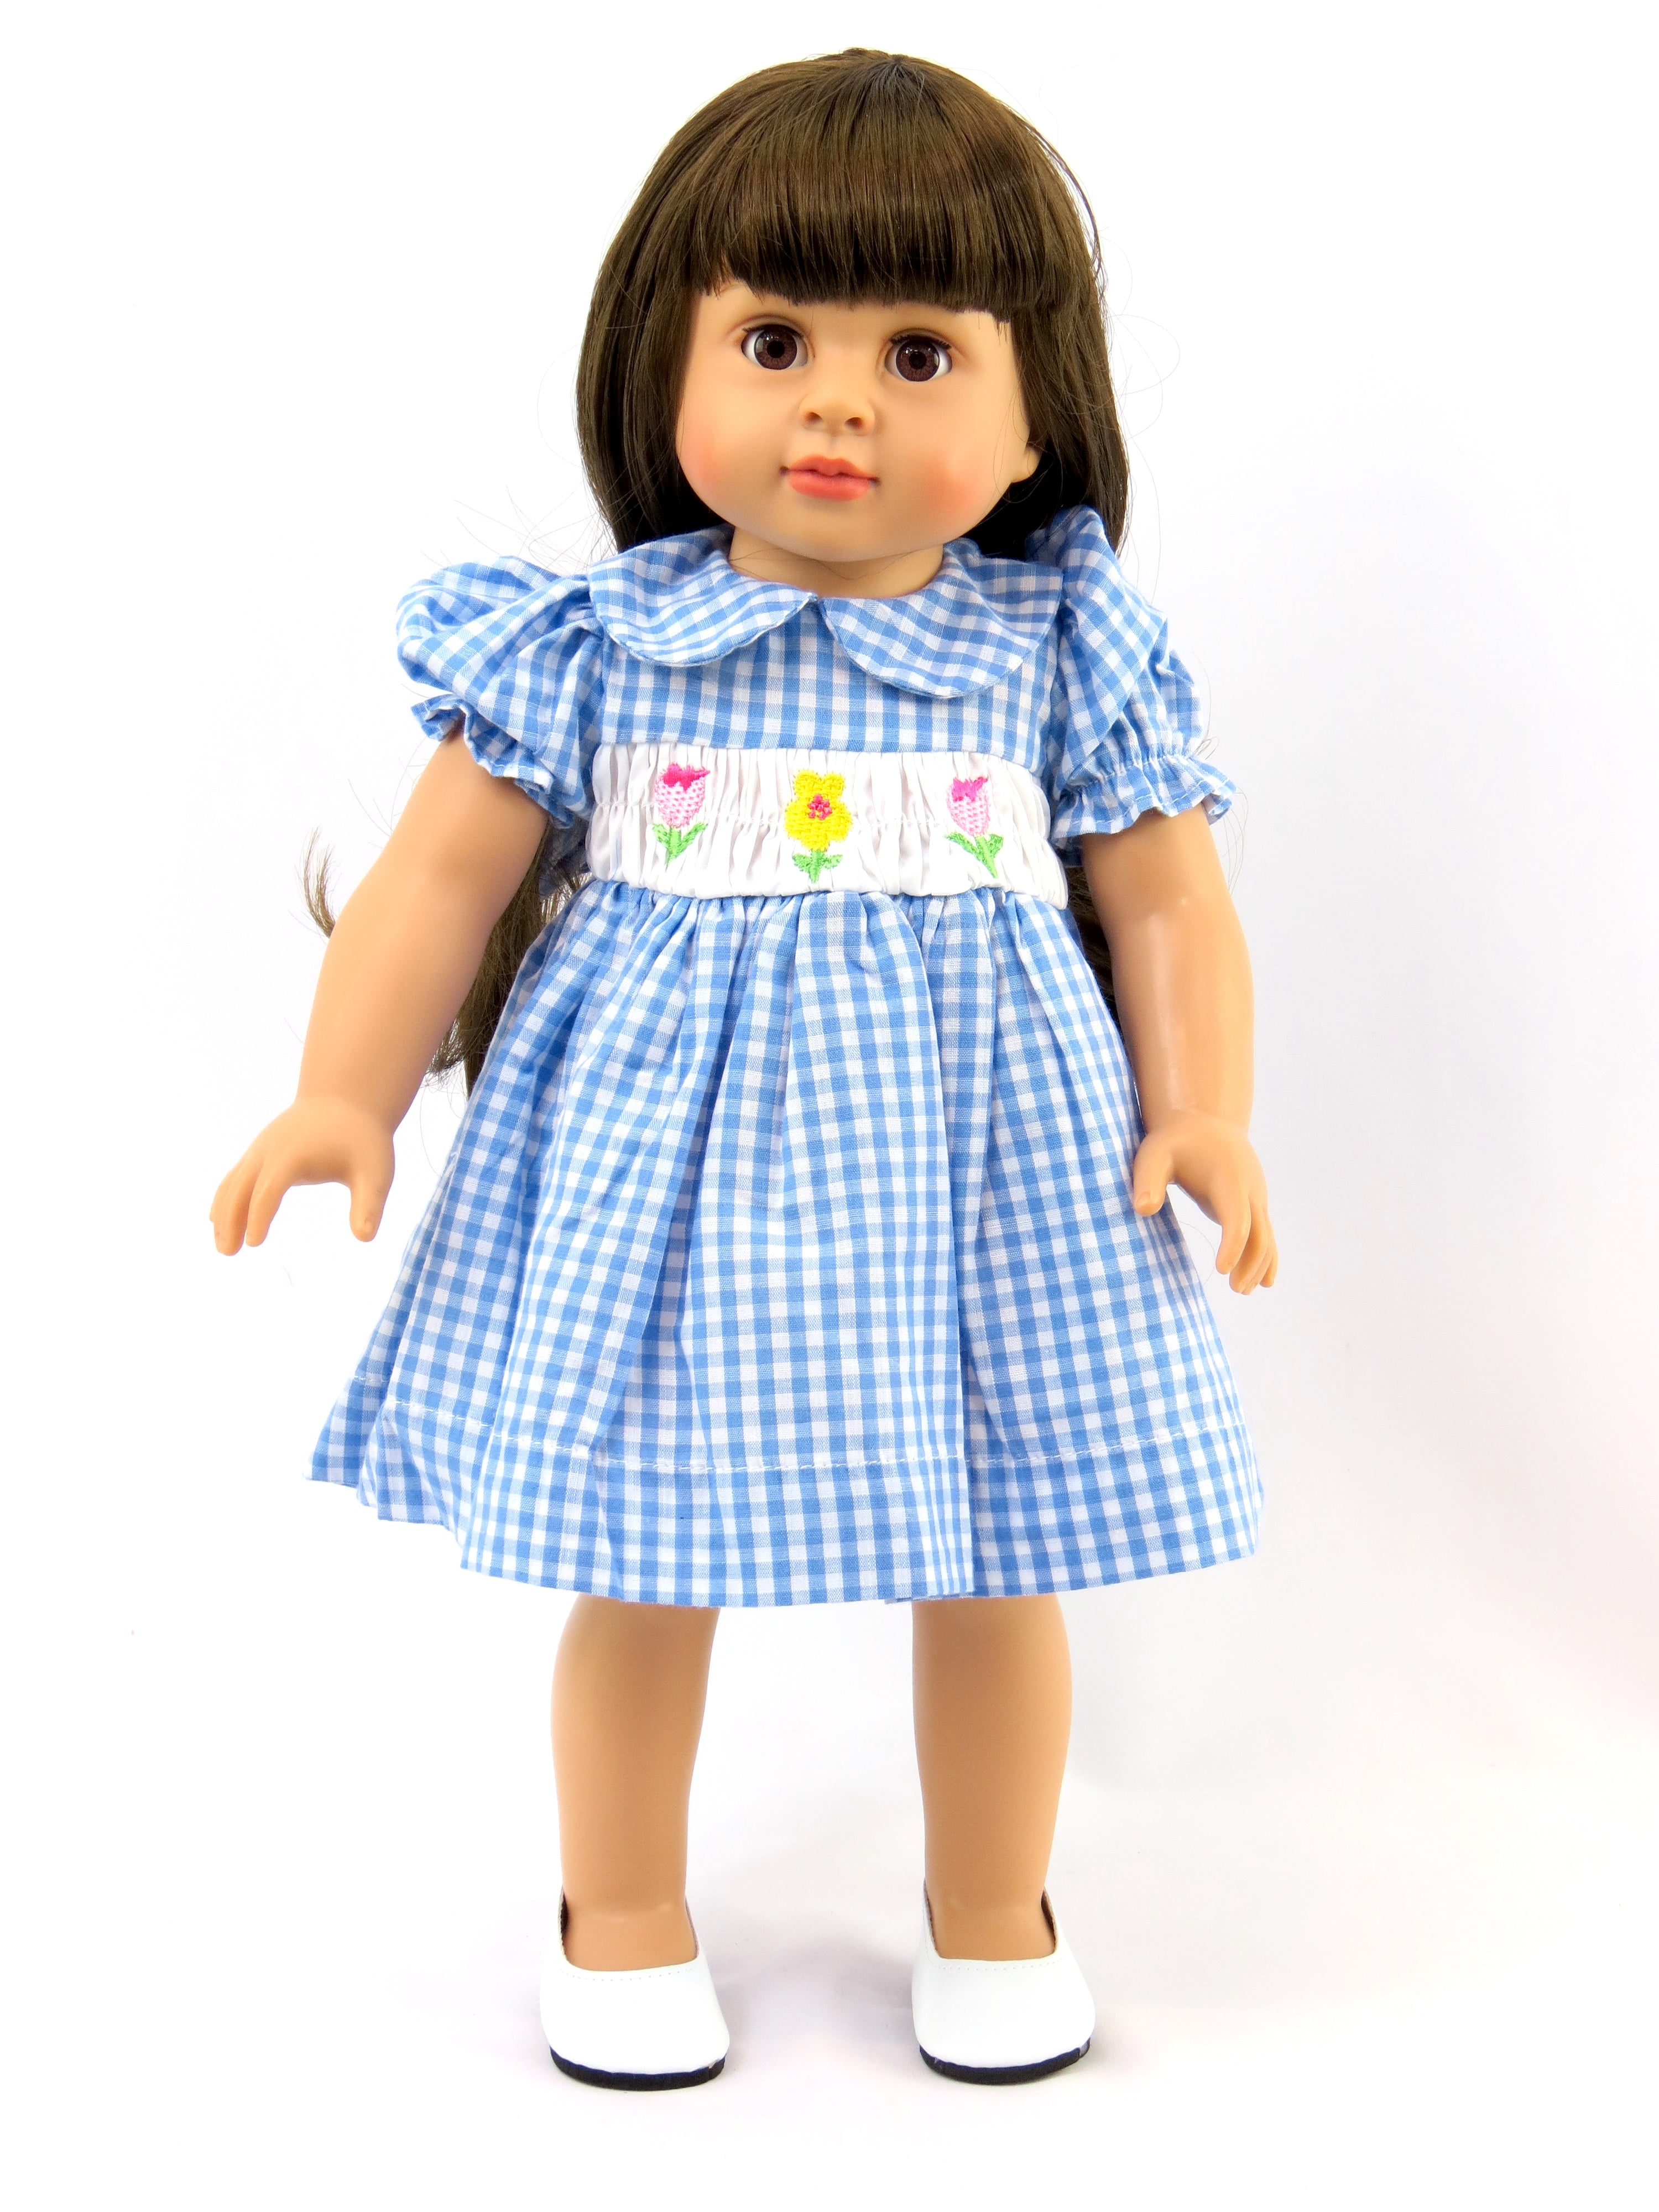 Doll clothes Light blue with white polka dots cupcake dress for 18 inch dolls Doll fashionable handmade sleeveless dress